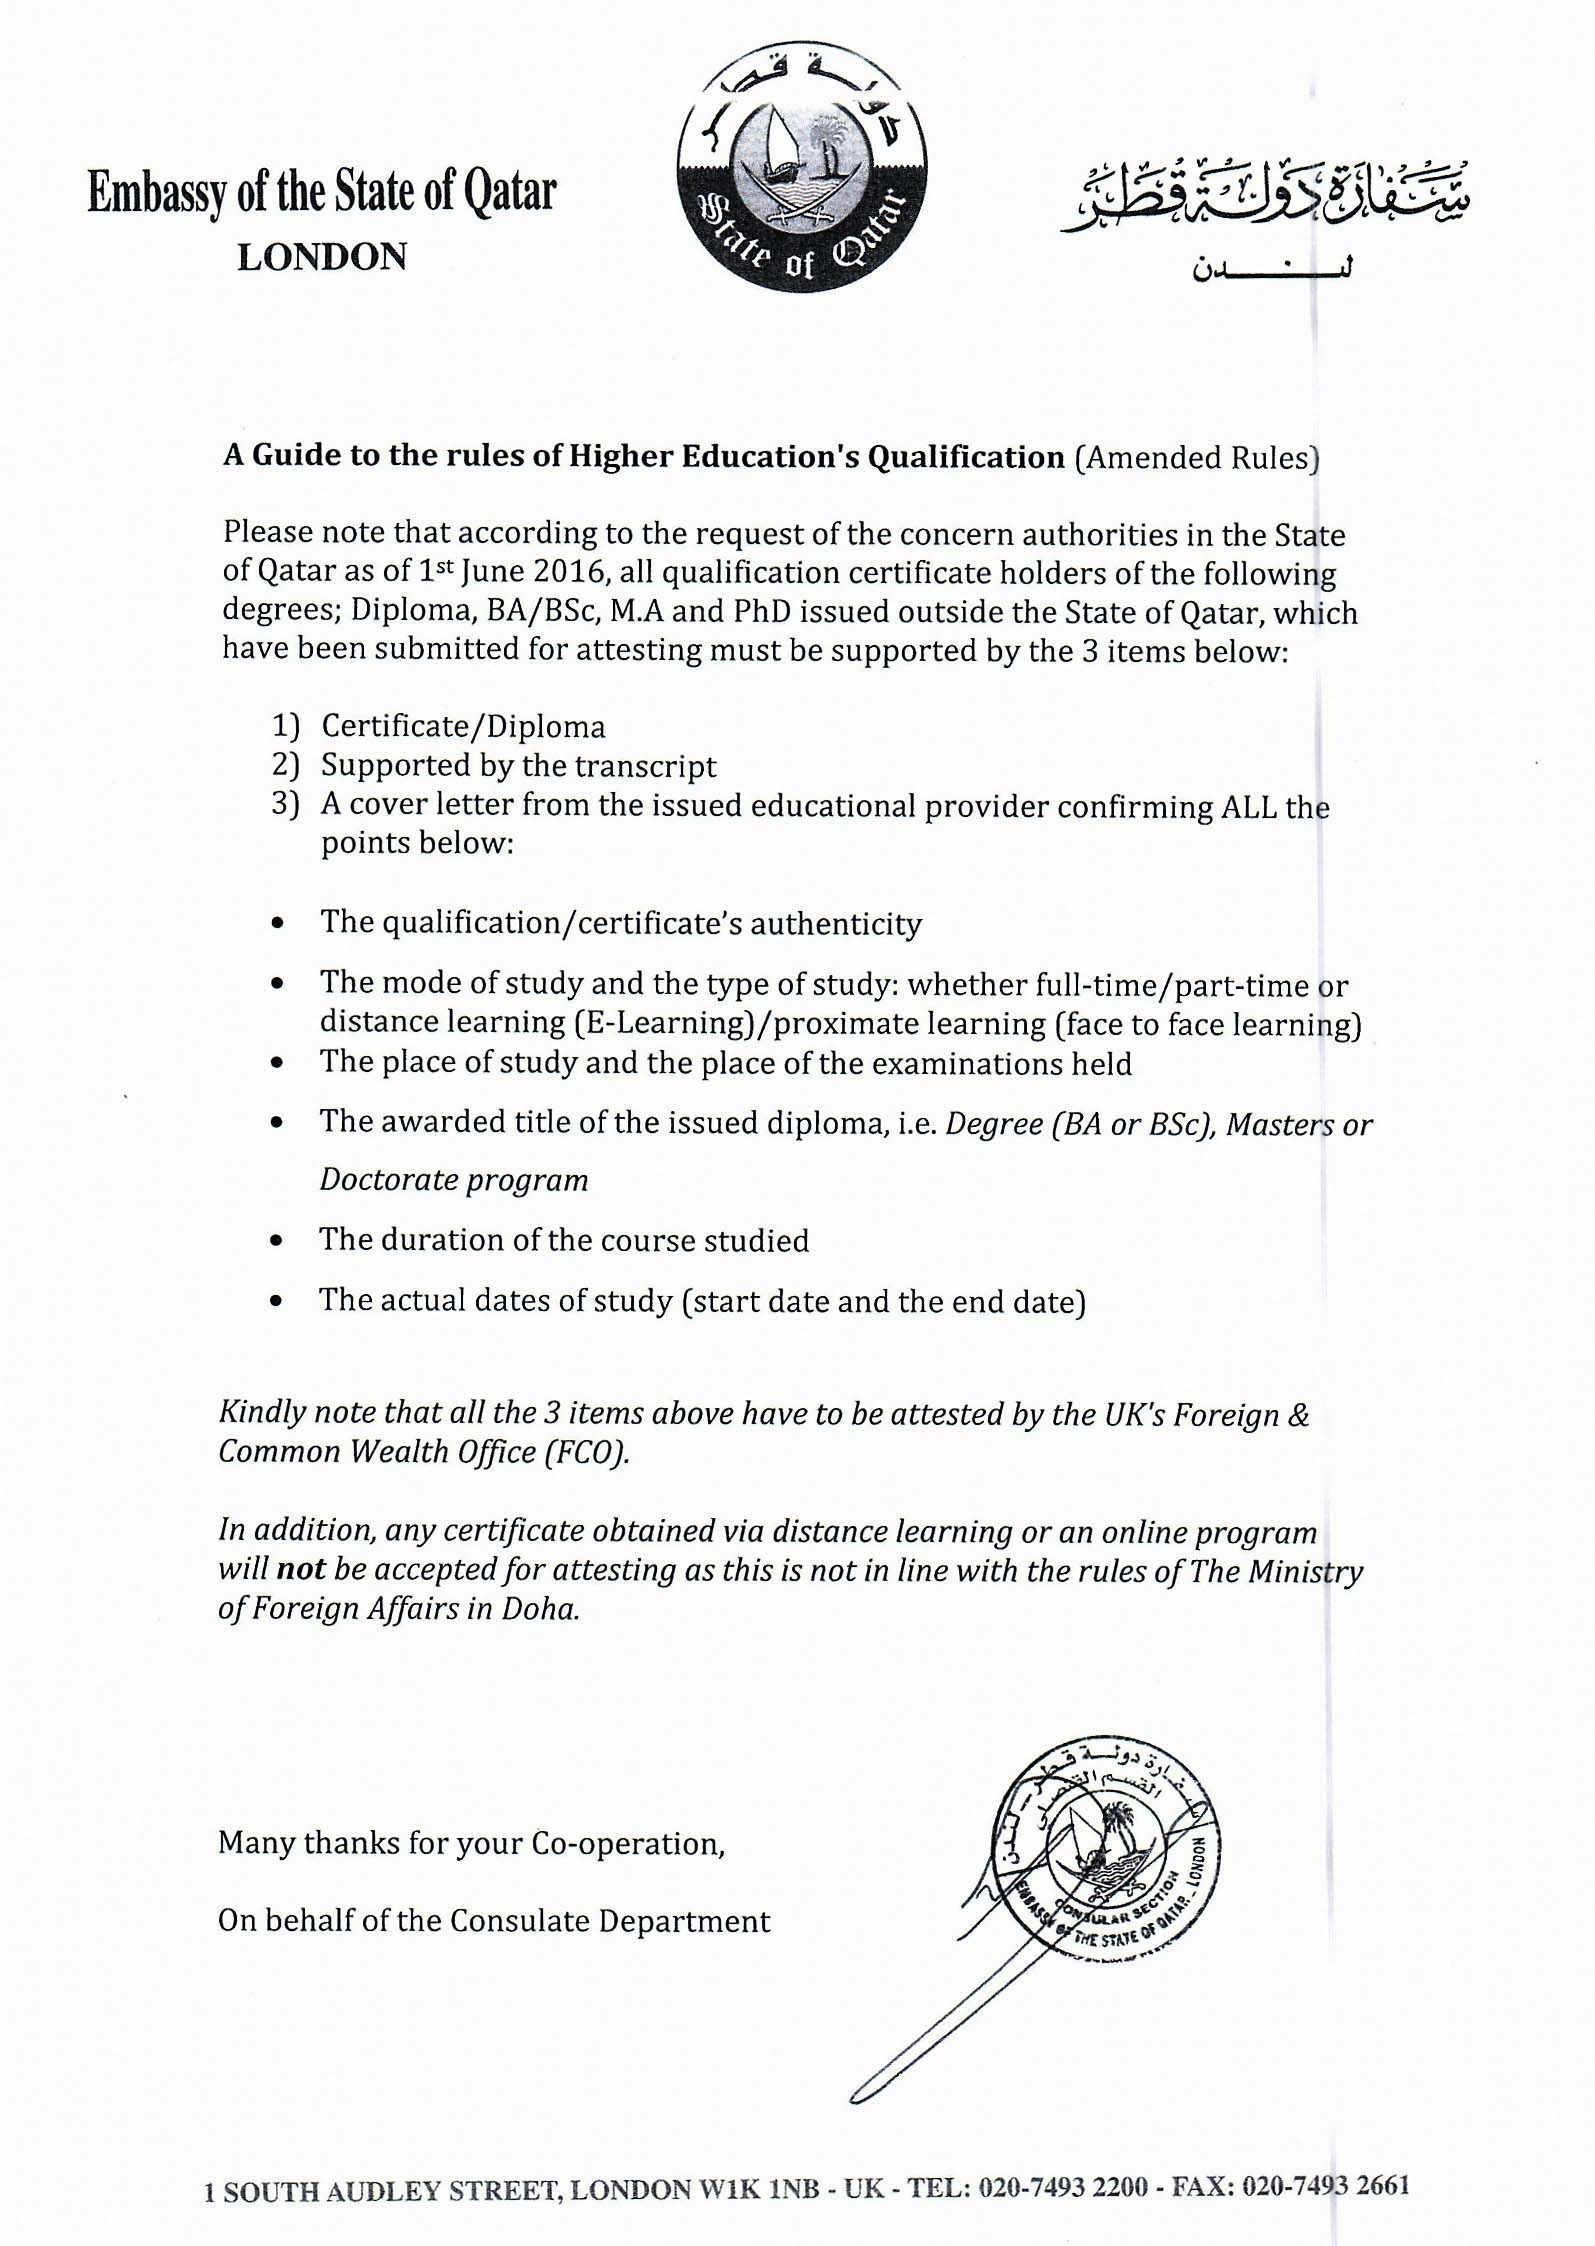 Circular issued by the Qatar Embassy in London